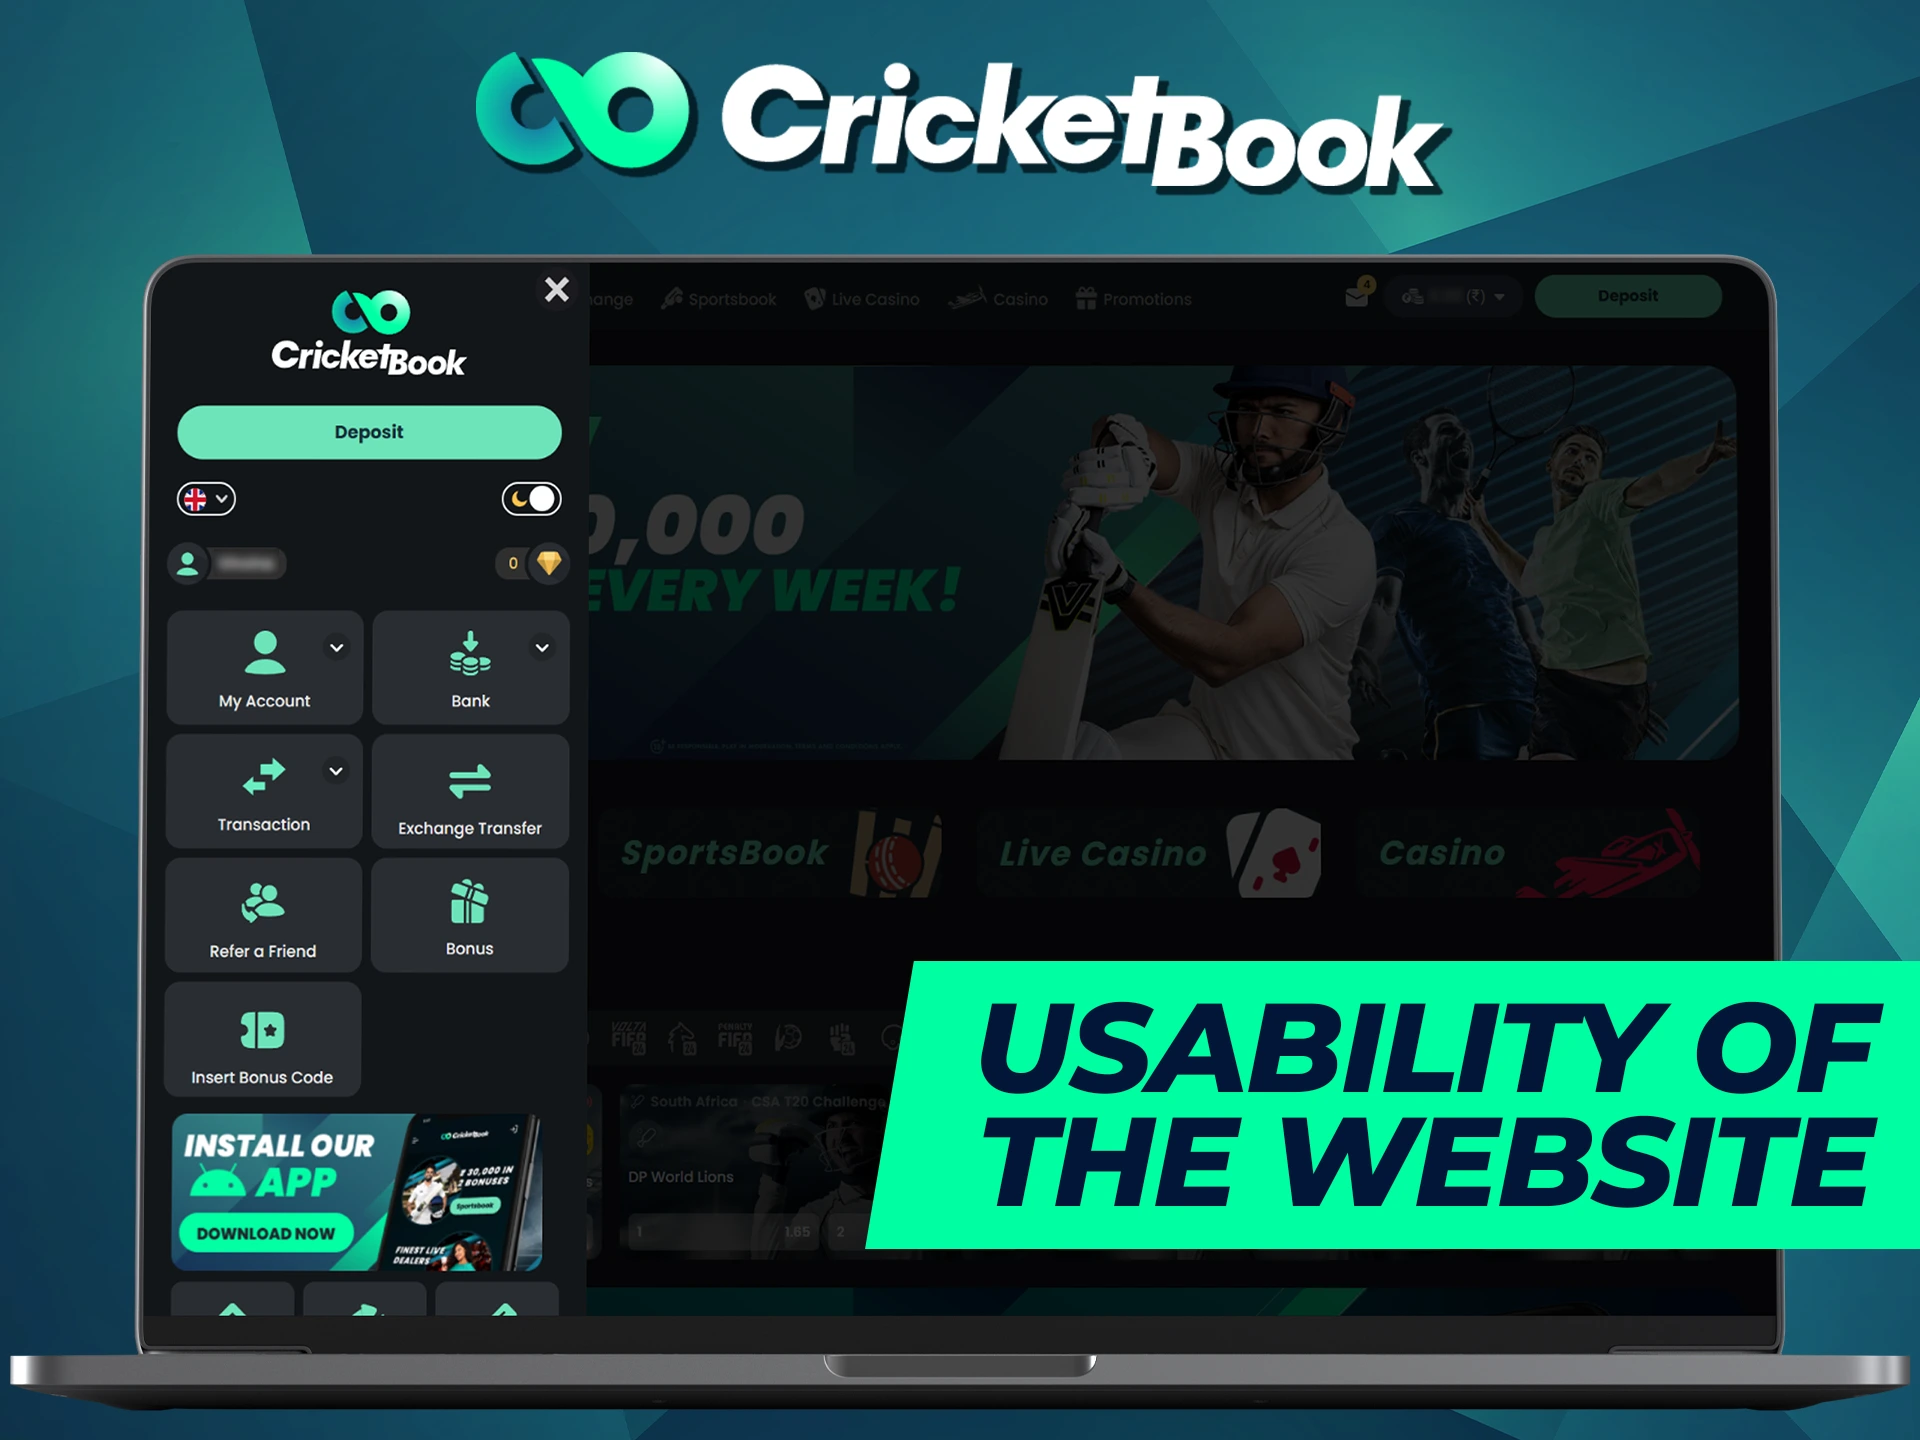 CricketBook website offers easy navigation and 24/7 customer support.